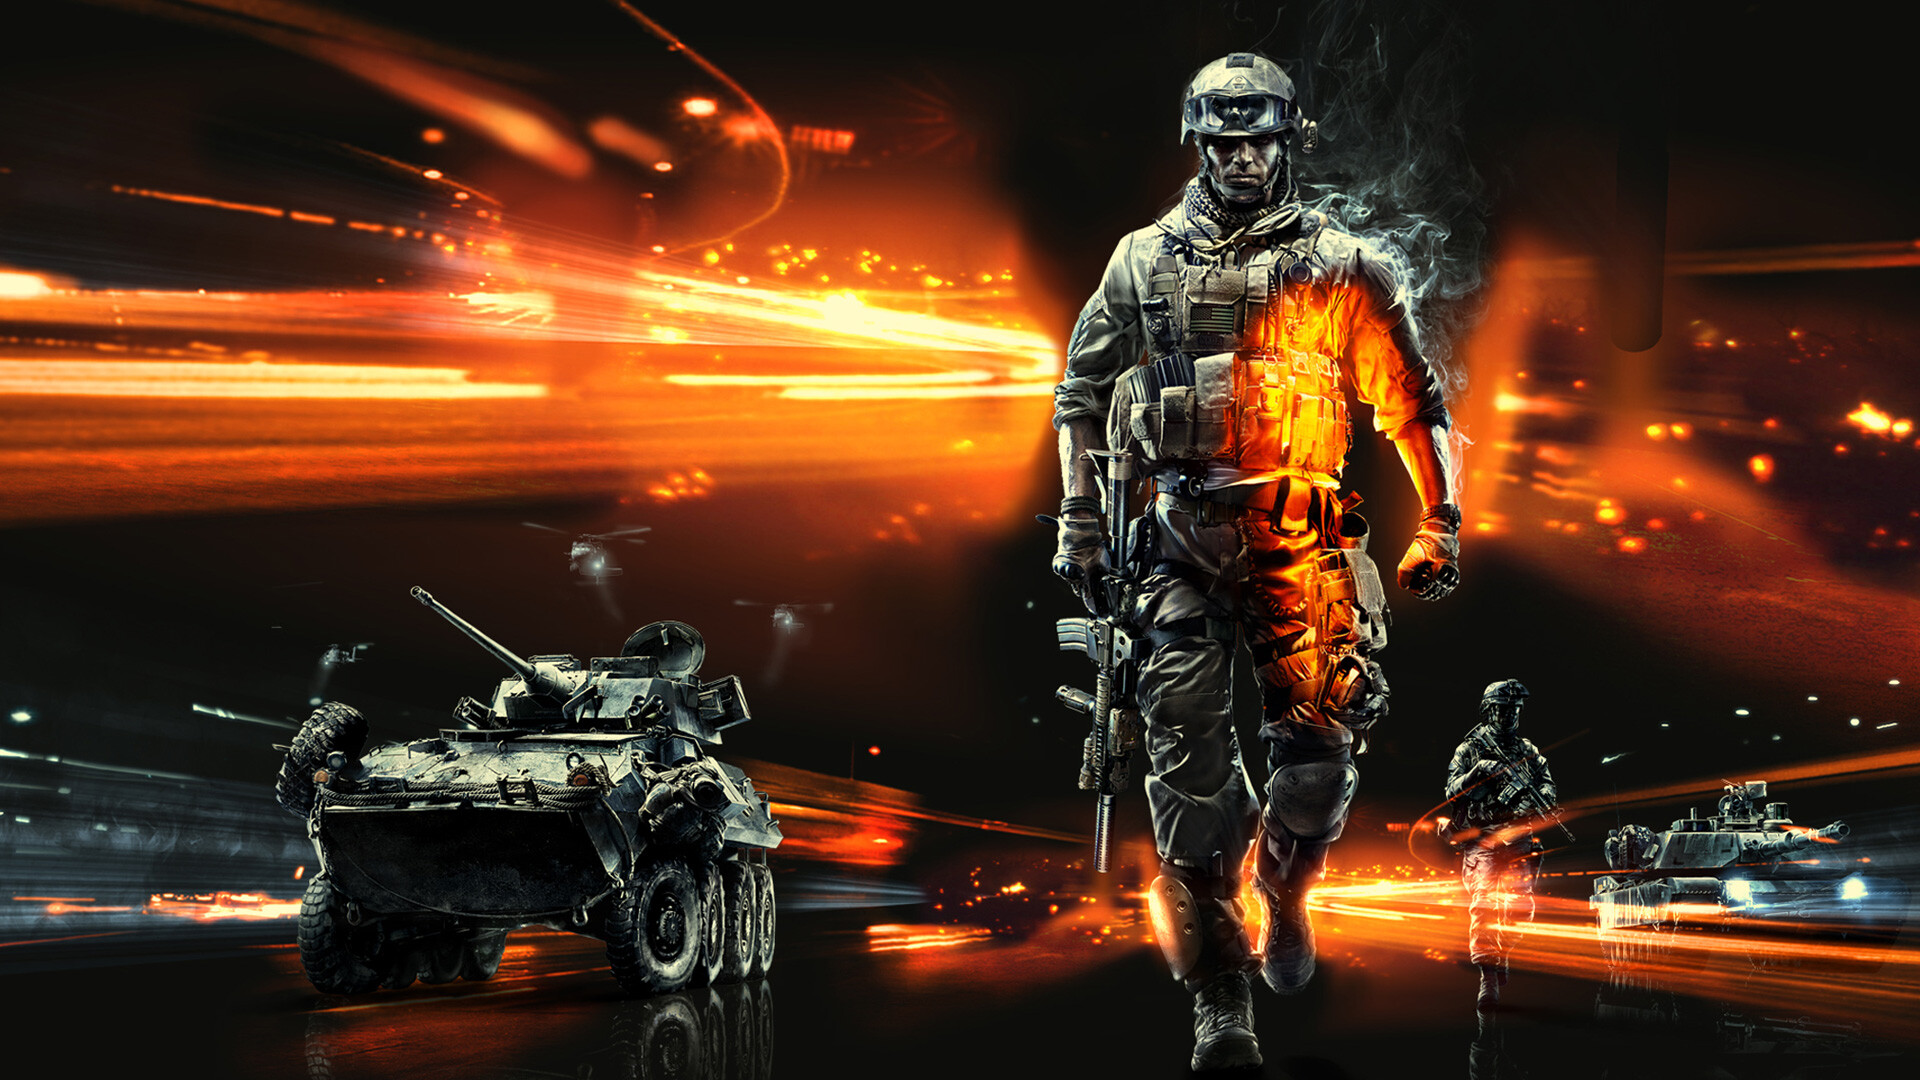 Battlefield 3: Known for its diverse battle scenarios, Gaming. 1920x1080 Full HD Background.